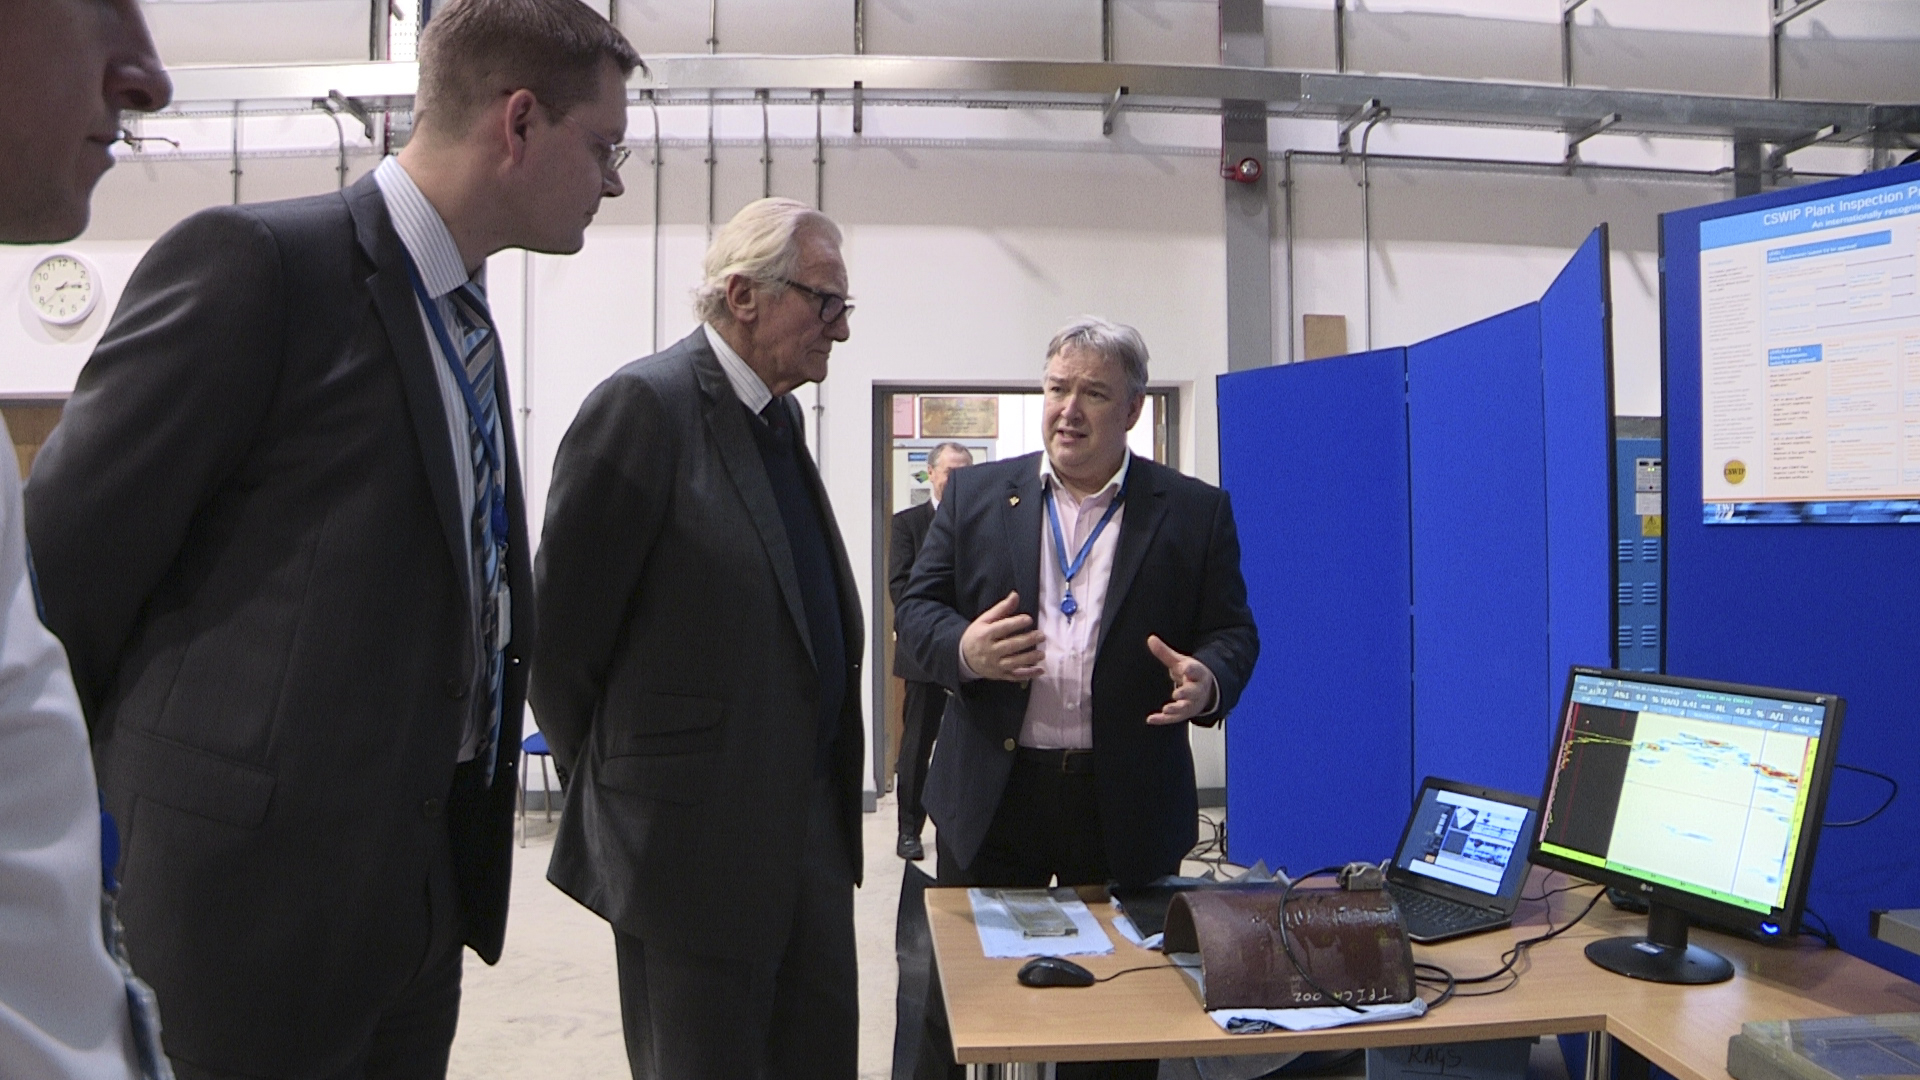 TWI's Neil Harrap discusses with Lord Heseltine non-destructive testing techniques used by inspection personnel to monitor the structural integrity of pipelines and large components